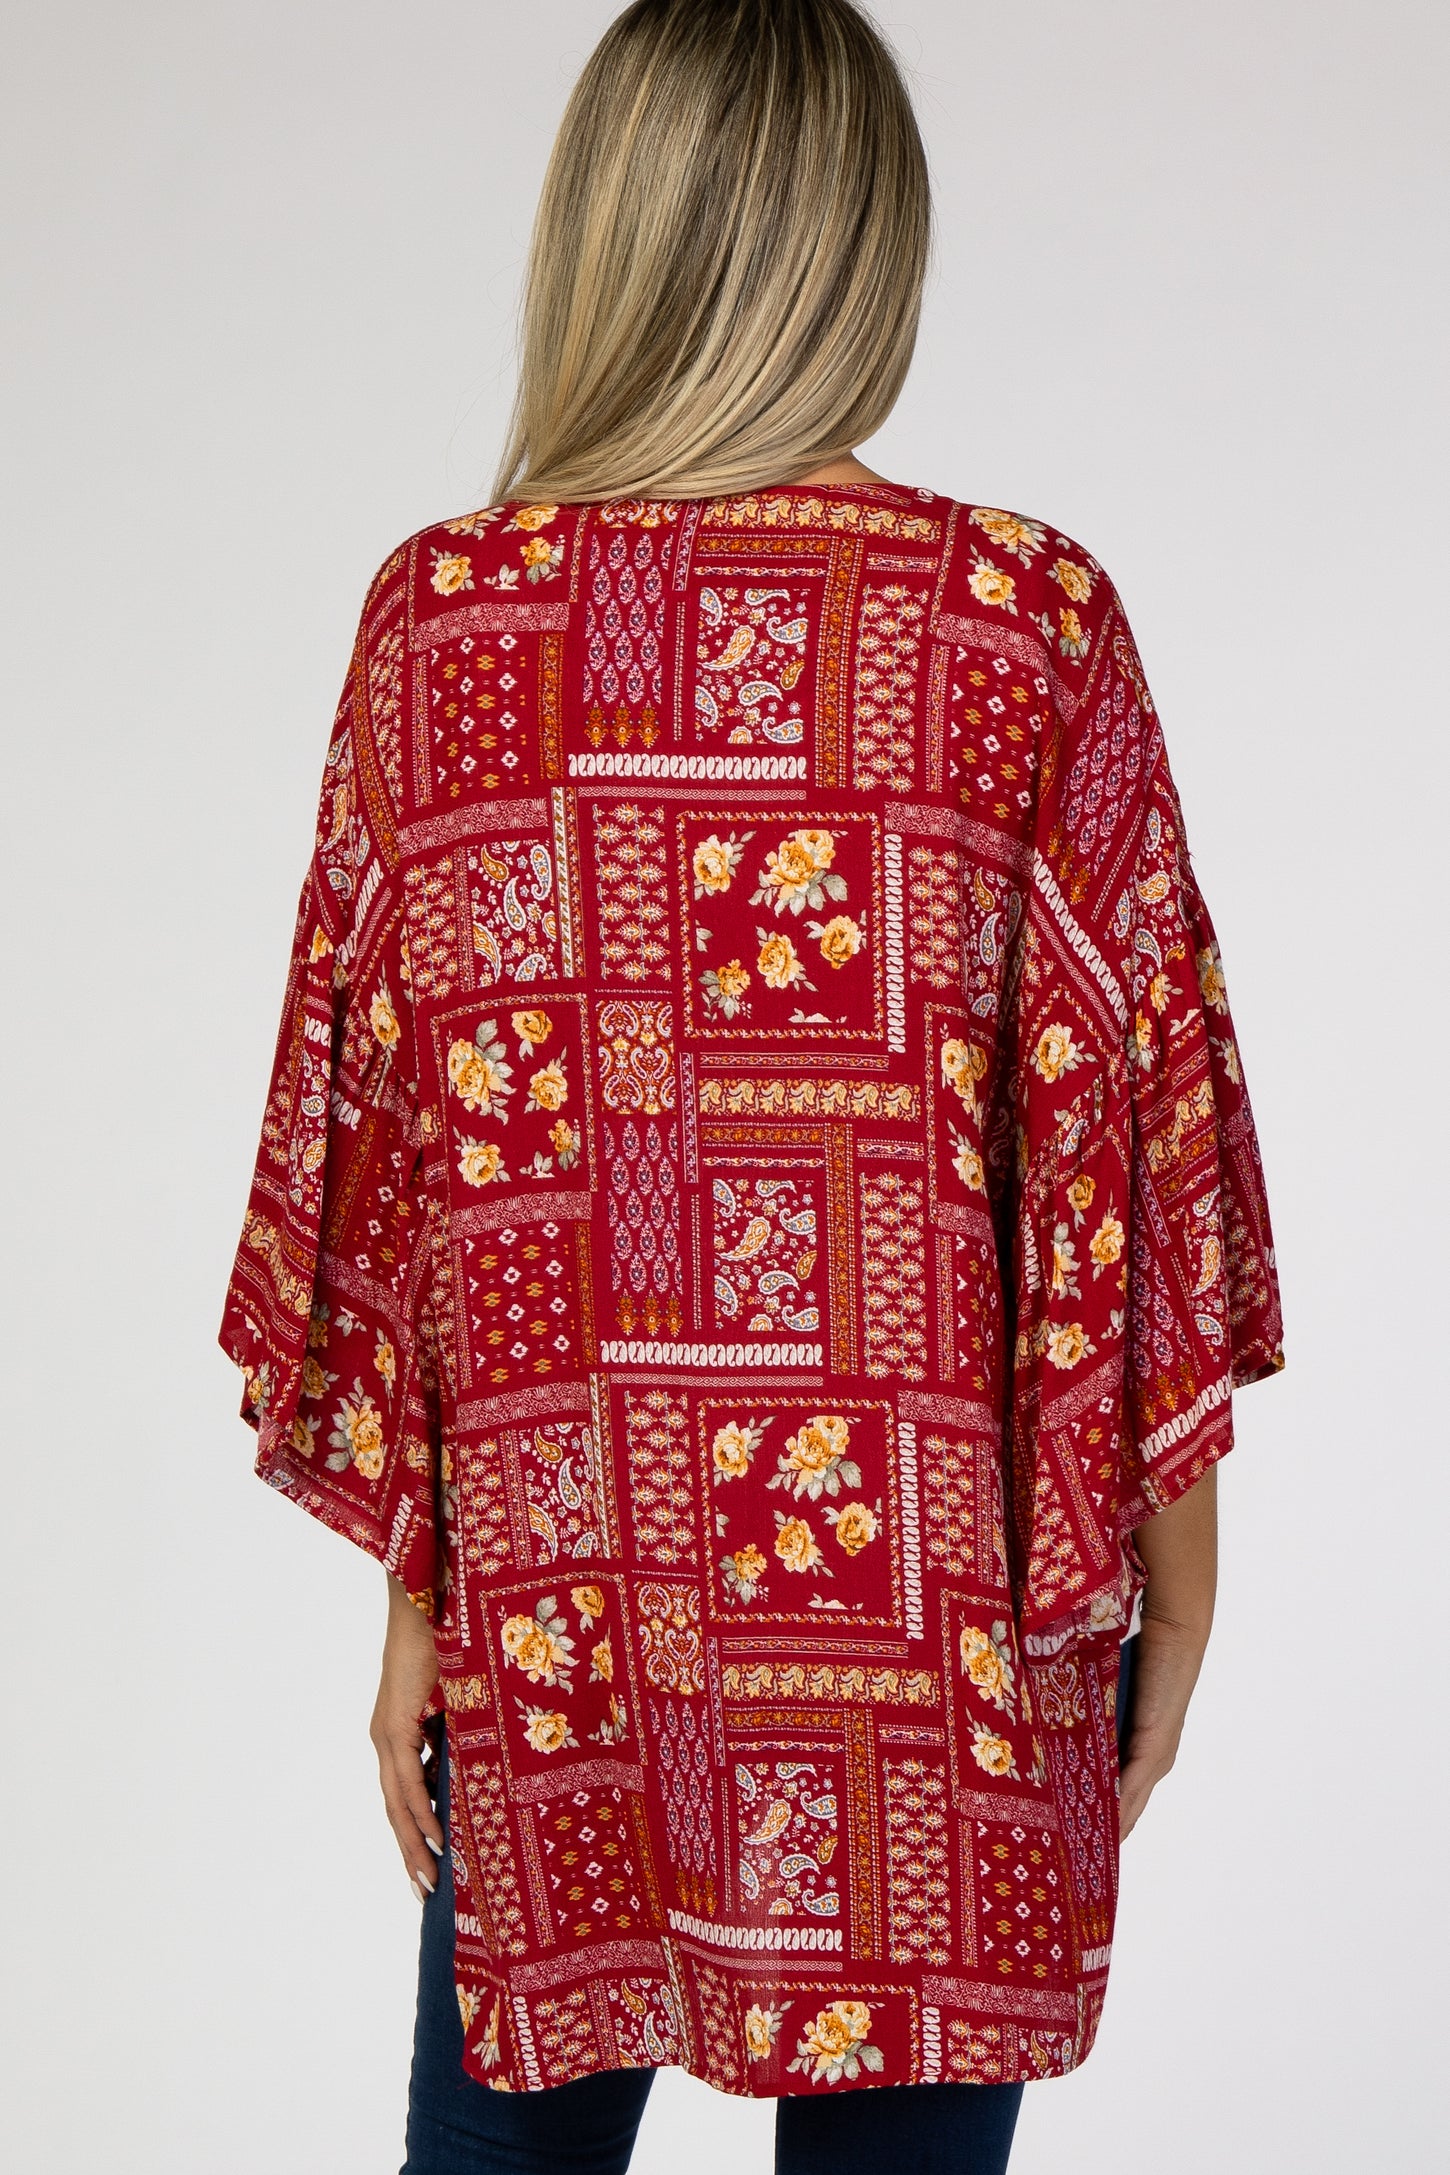 Red Paisley Floral Ruffle Sleeve Maternity Cover Up